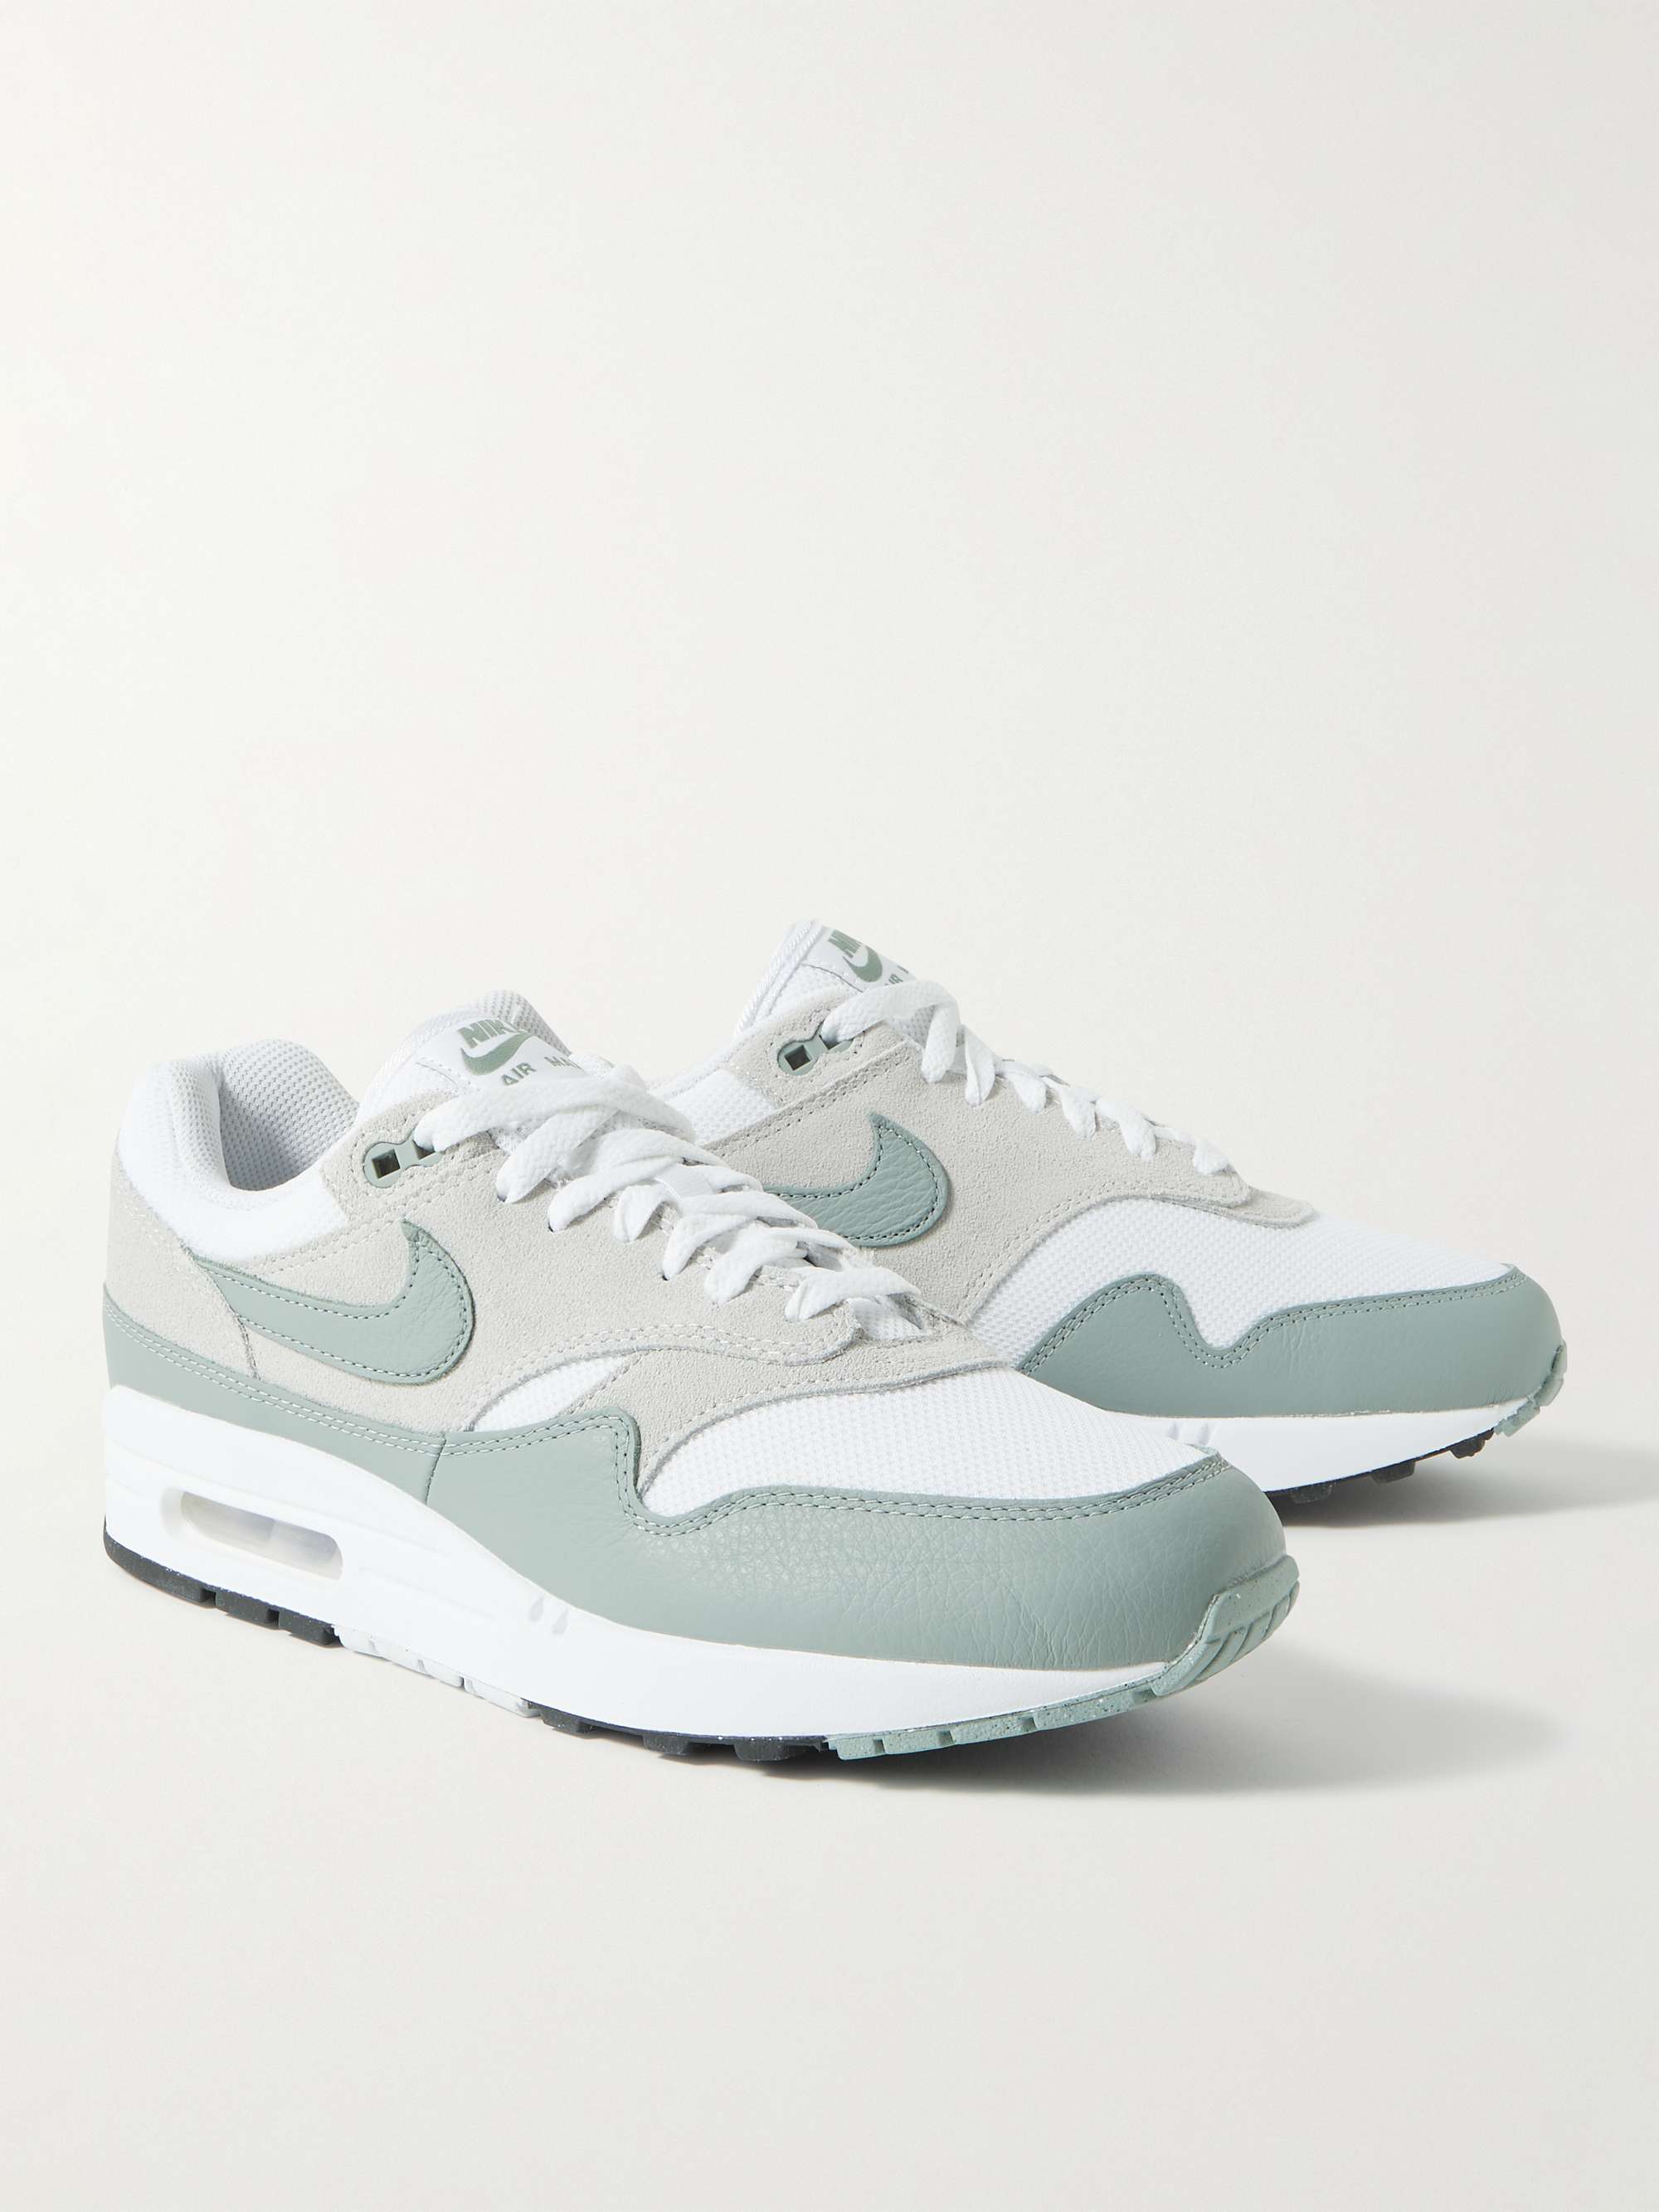 NIKE Air Max 1 SC Suede, Mesh and Leather Sneakers | MR PORTER